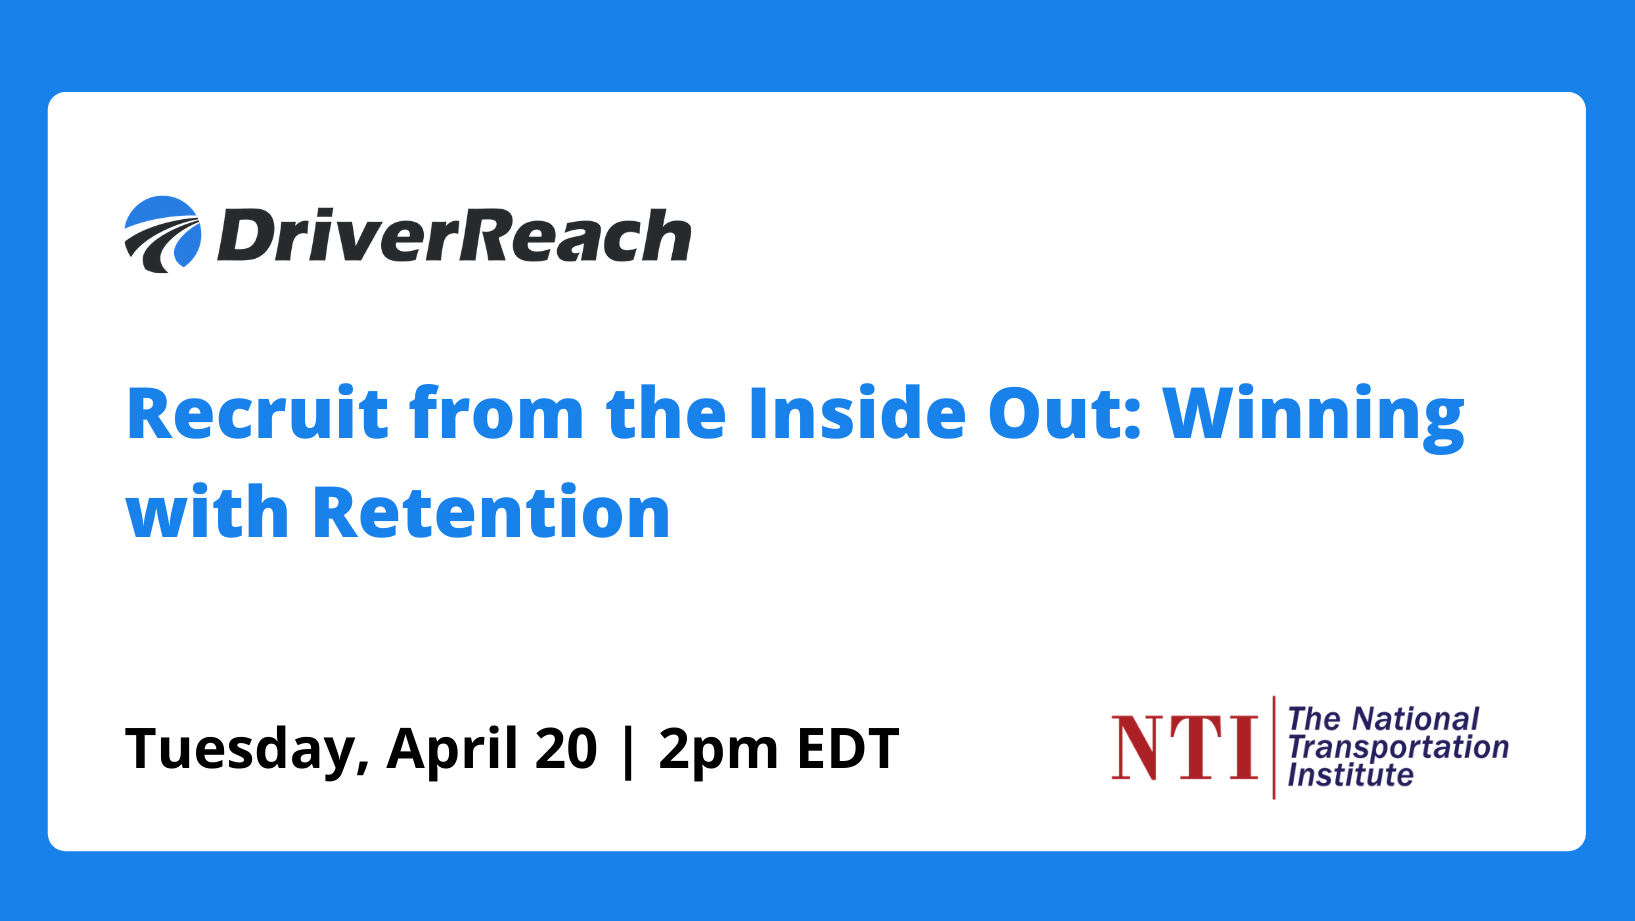 Webinar | “Recruit from the Inside Out: Winning with Retention”